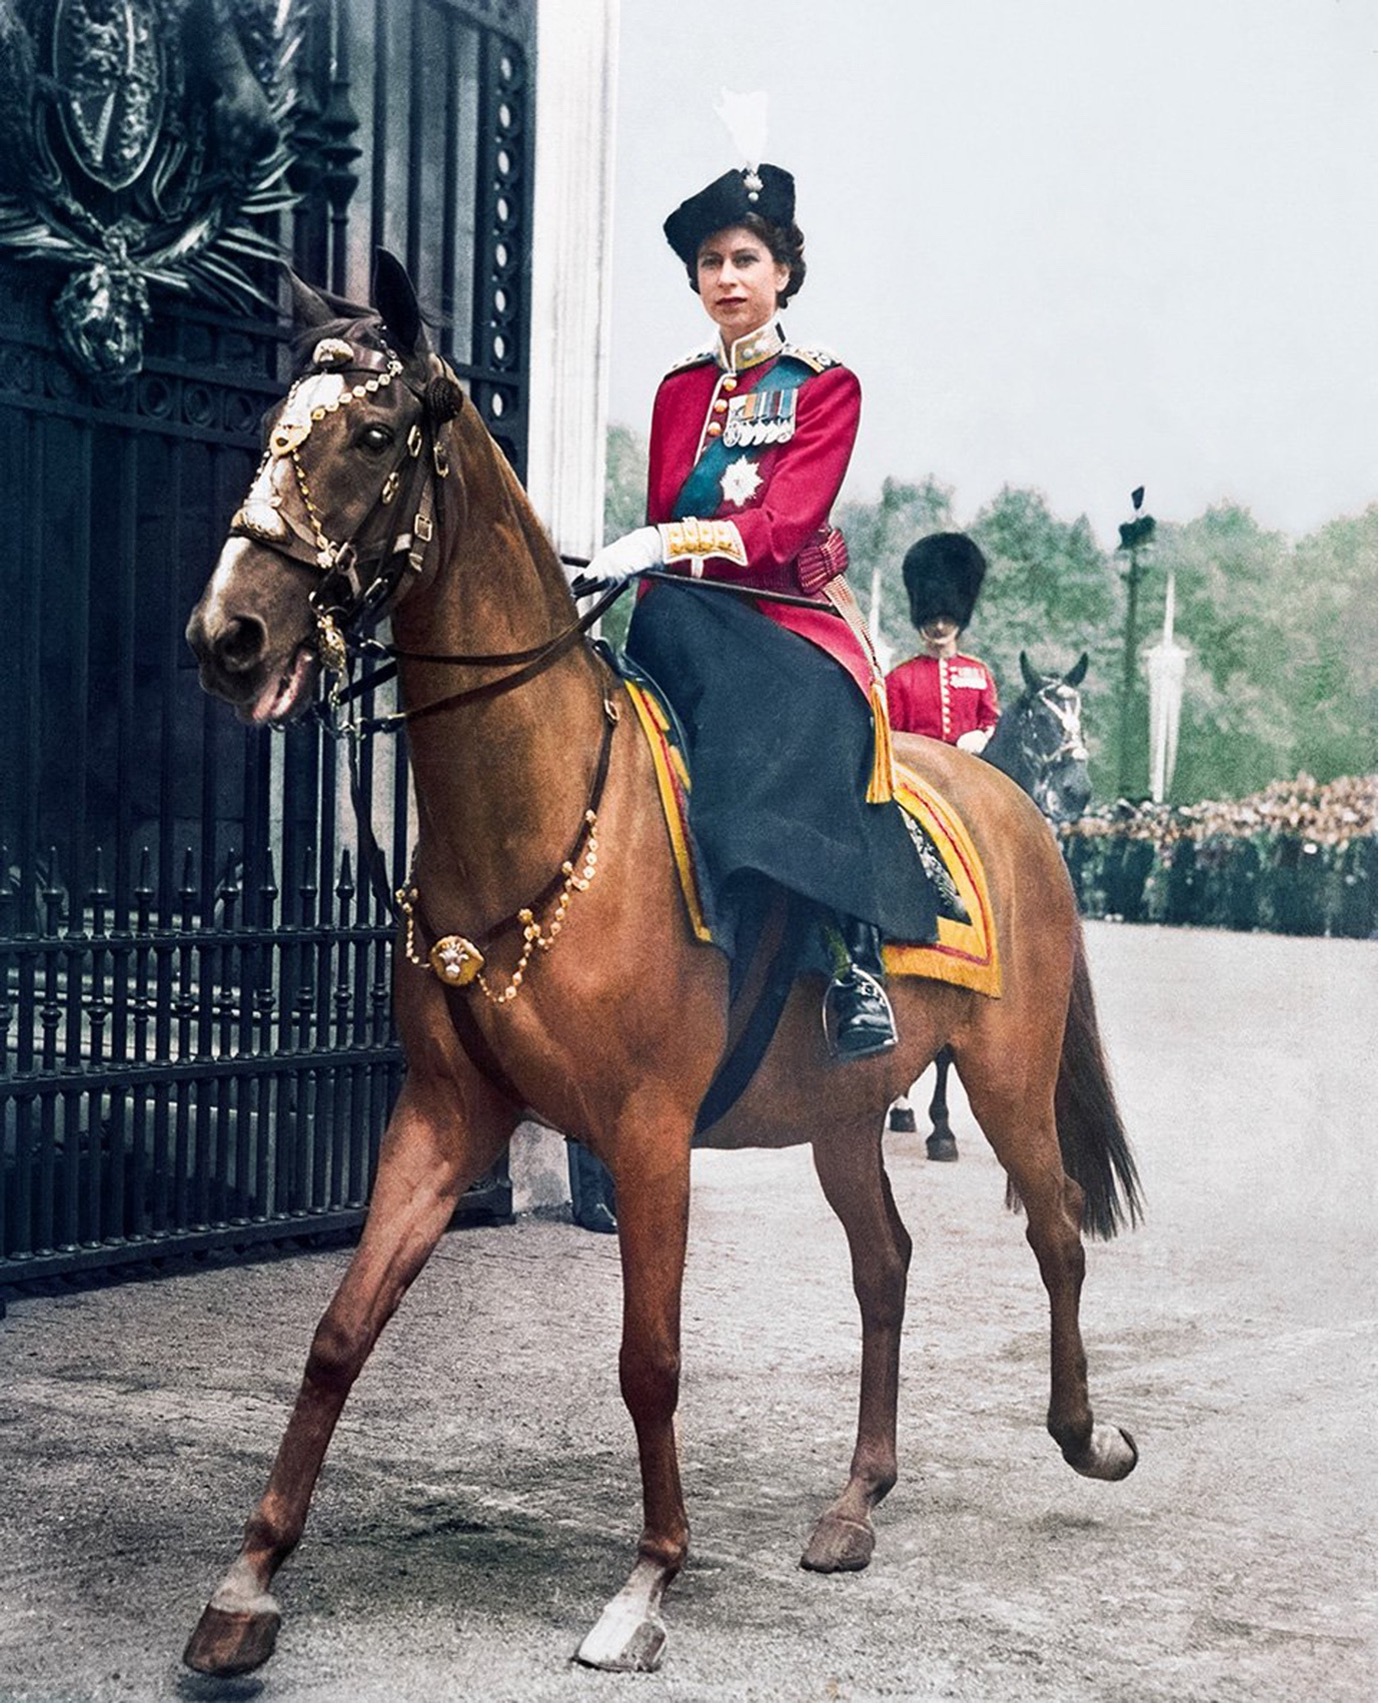 The Wick - Princess Elizabeth at the Trooping the Colour in 1951. Taschen.